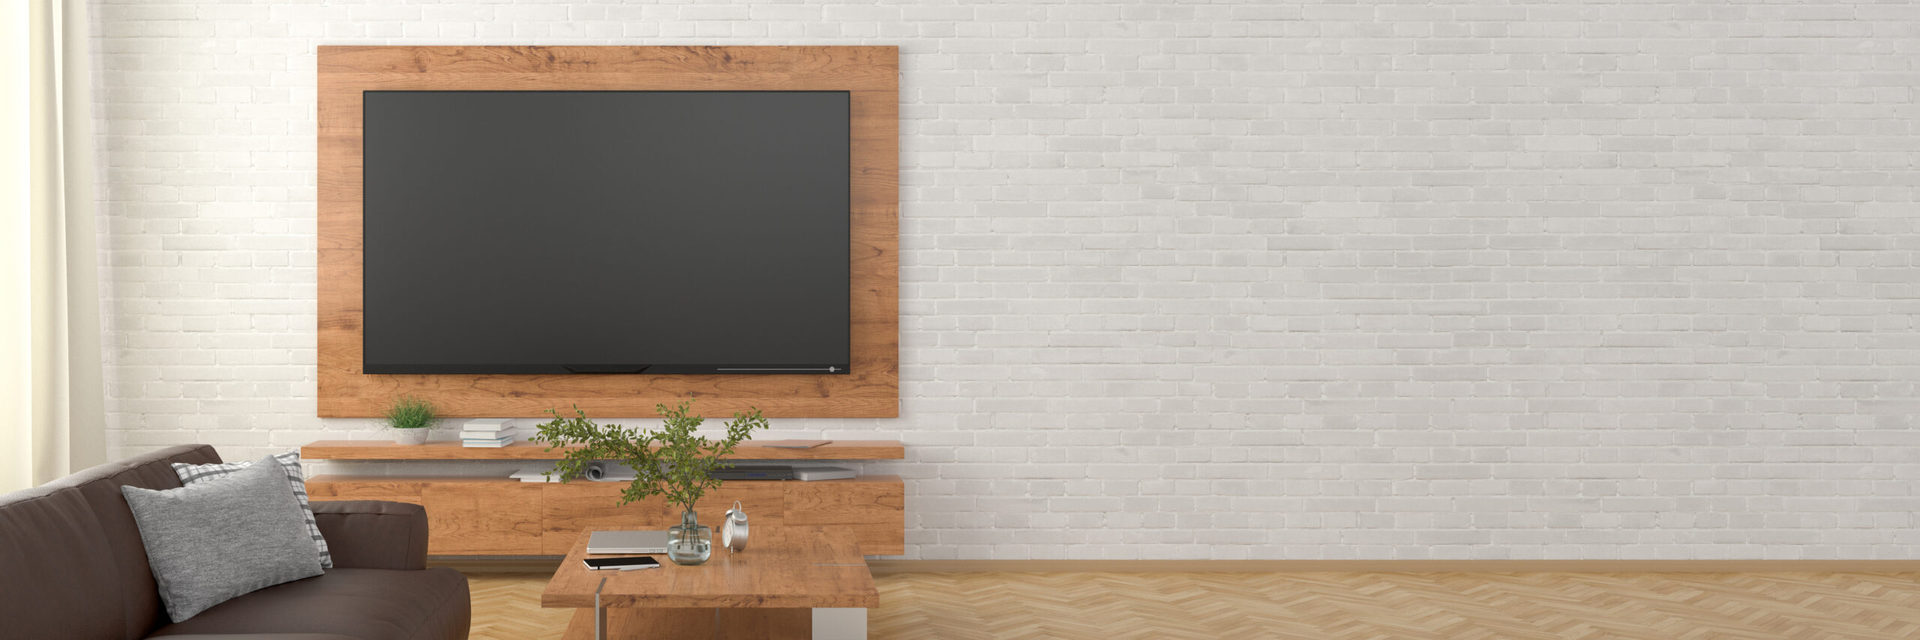 Blank TV screen in a living room